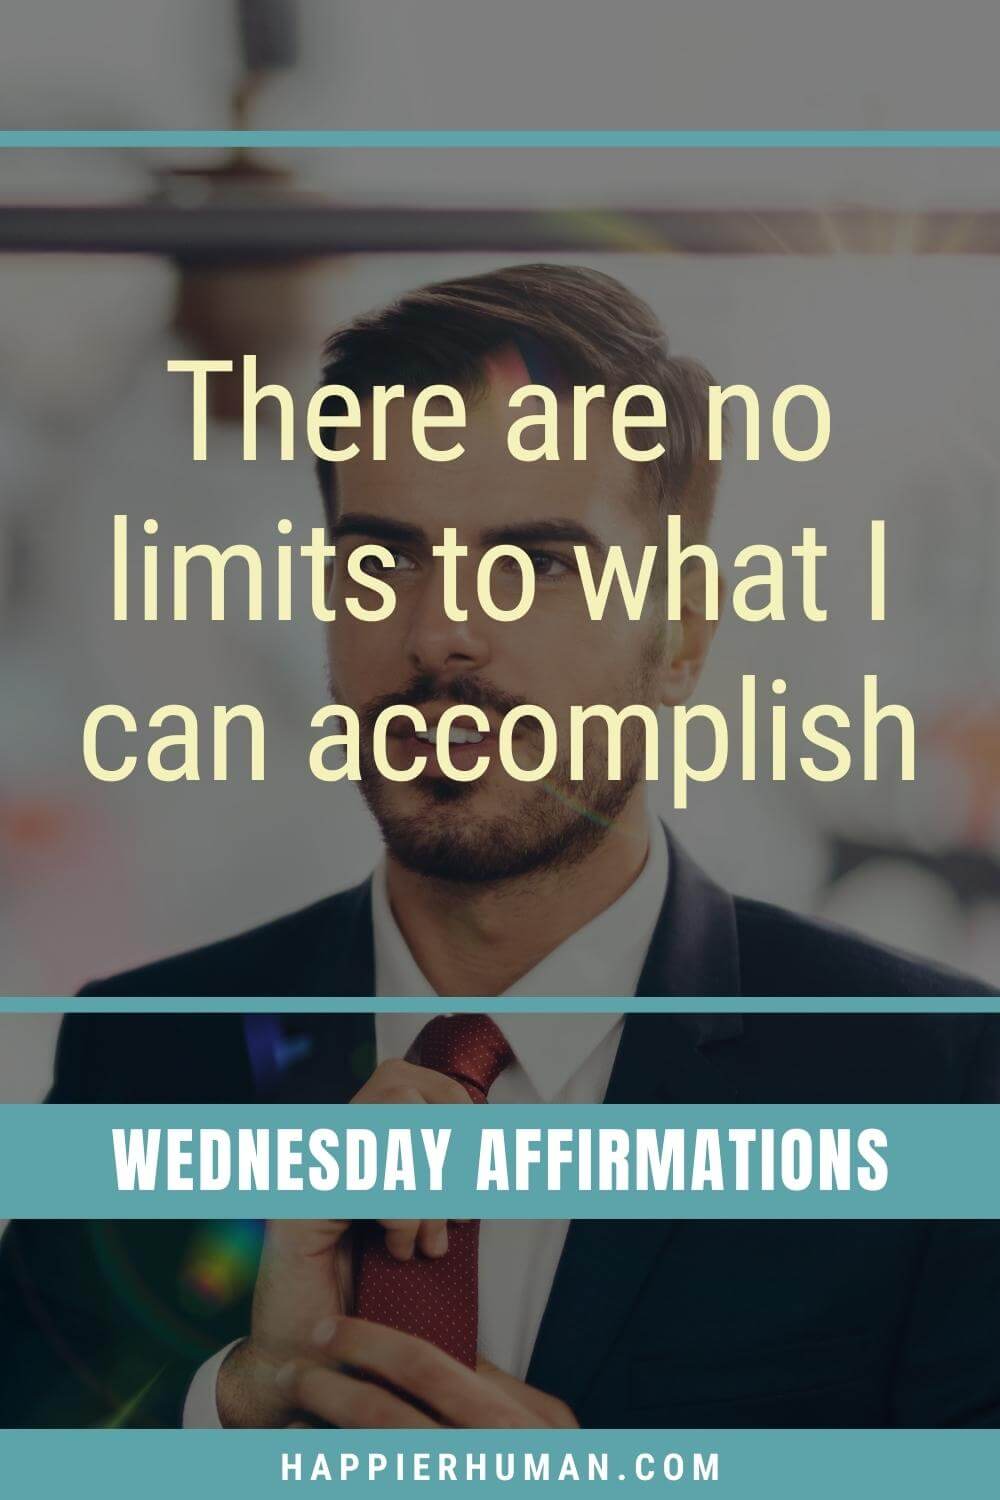 Wednesday Affirmations - There are no limits to what I can accomplish | wednesday quotes | wednesday positive quotes | daily affirmations